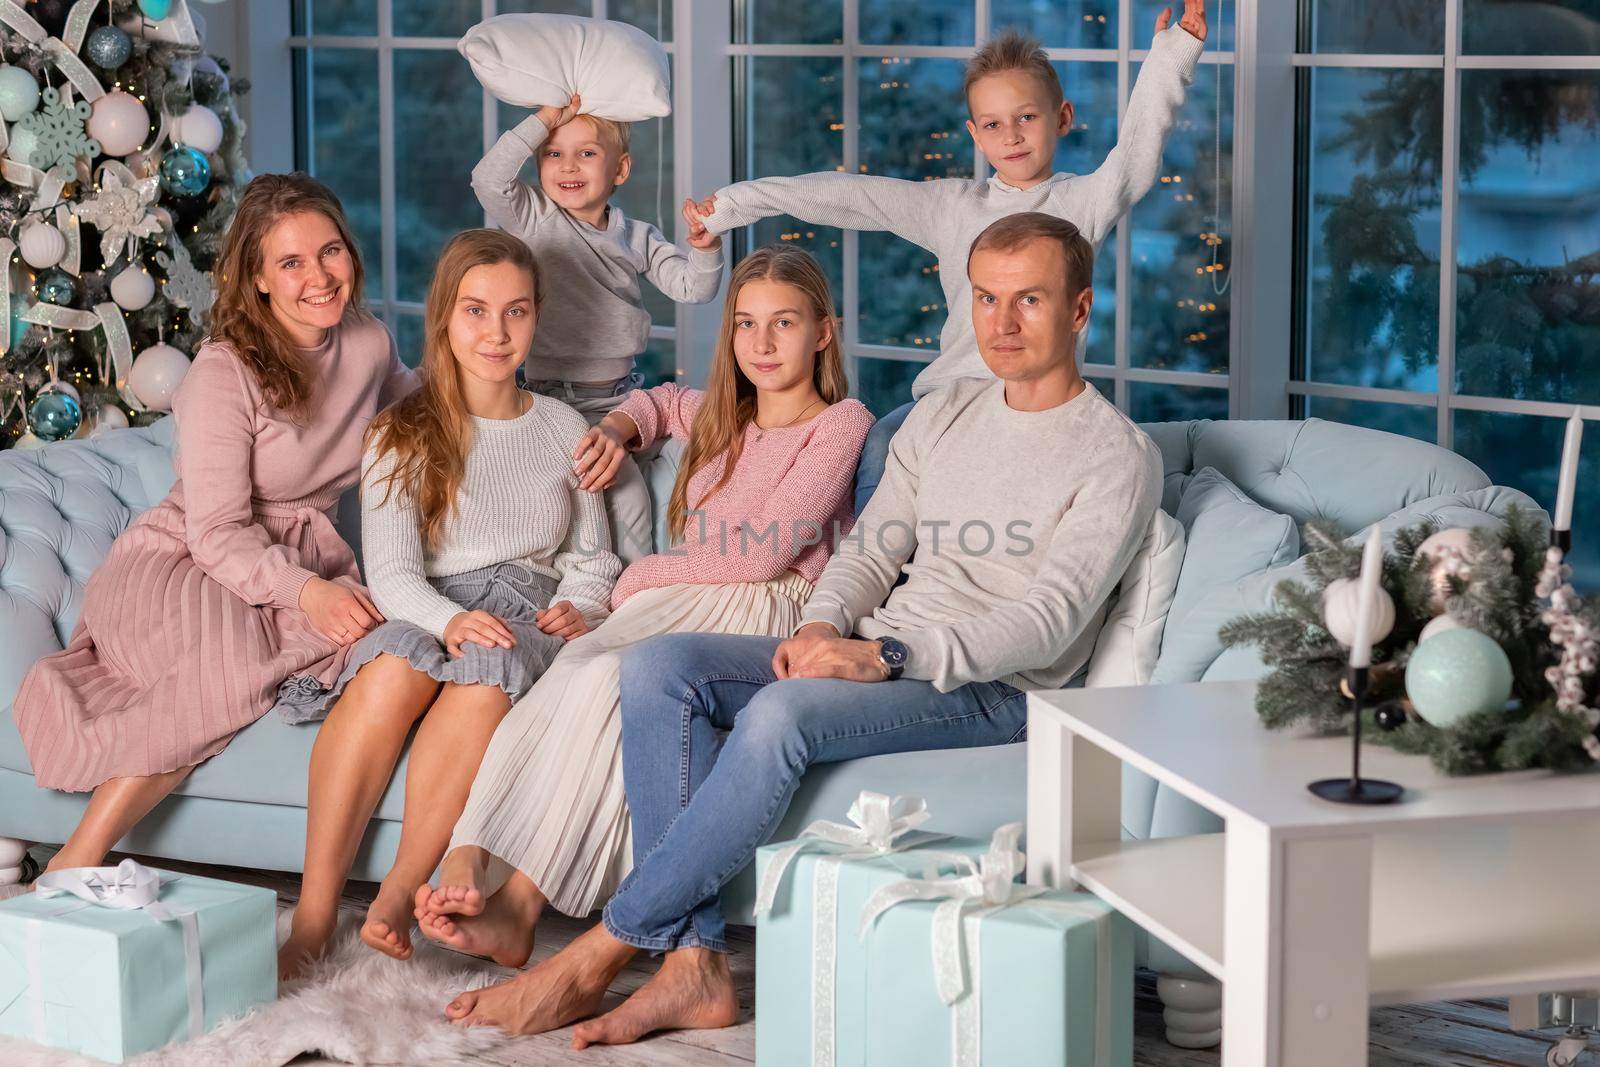 Big Happy family with many kids having fun and pillow fight under the Christmas tree. Christmas family eve, christmas mood concept